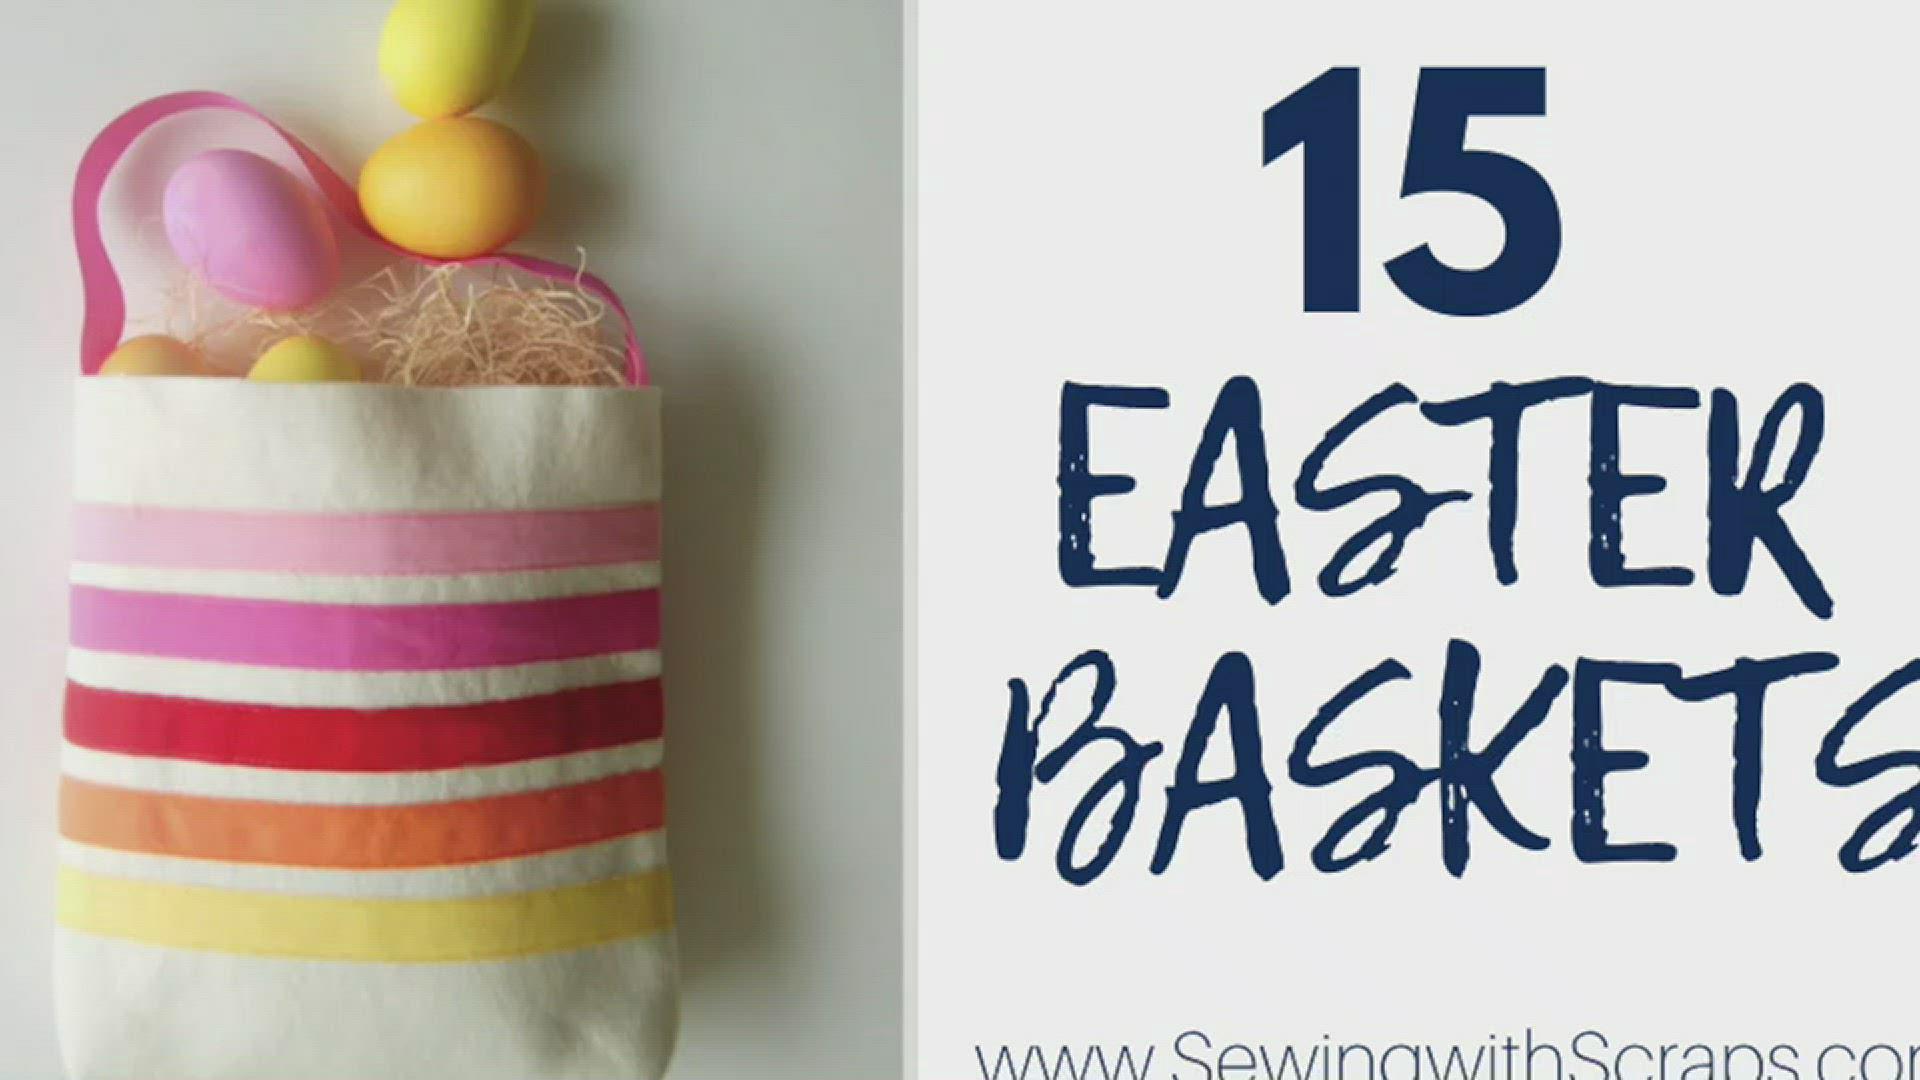 'Video thumbnail for 15 Free Easter Basket Patterns'